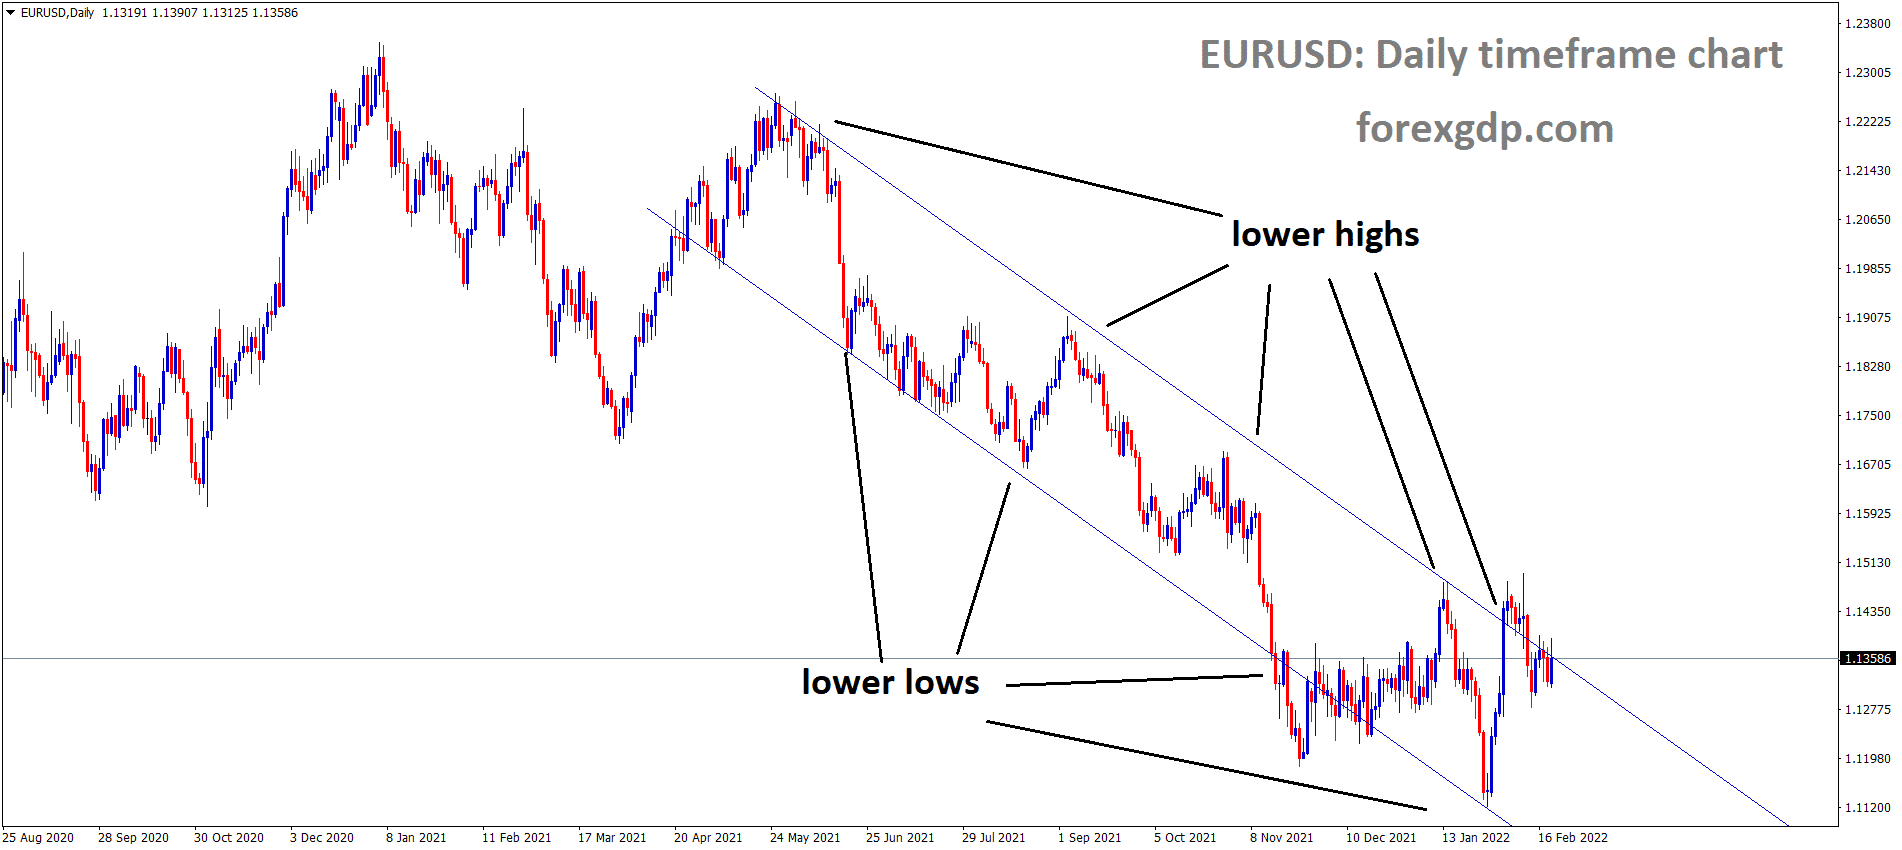 EURUSD is moving in the Descending channel and the market has consolidated at the lower high area of the channel.